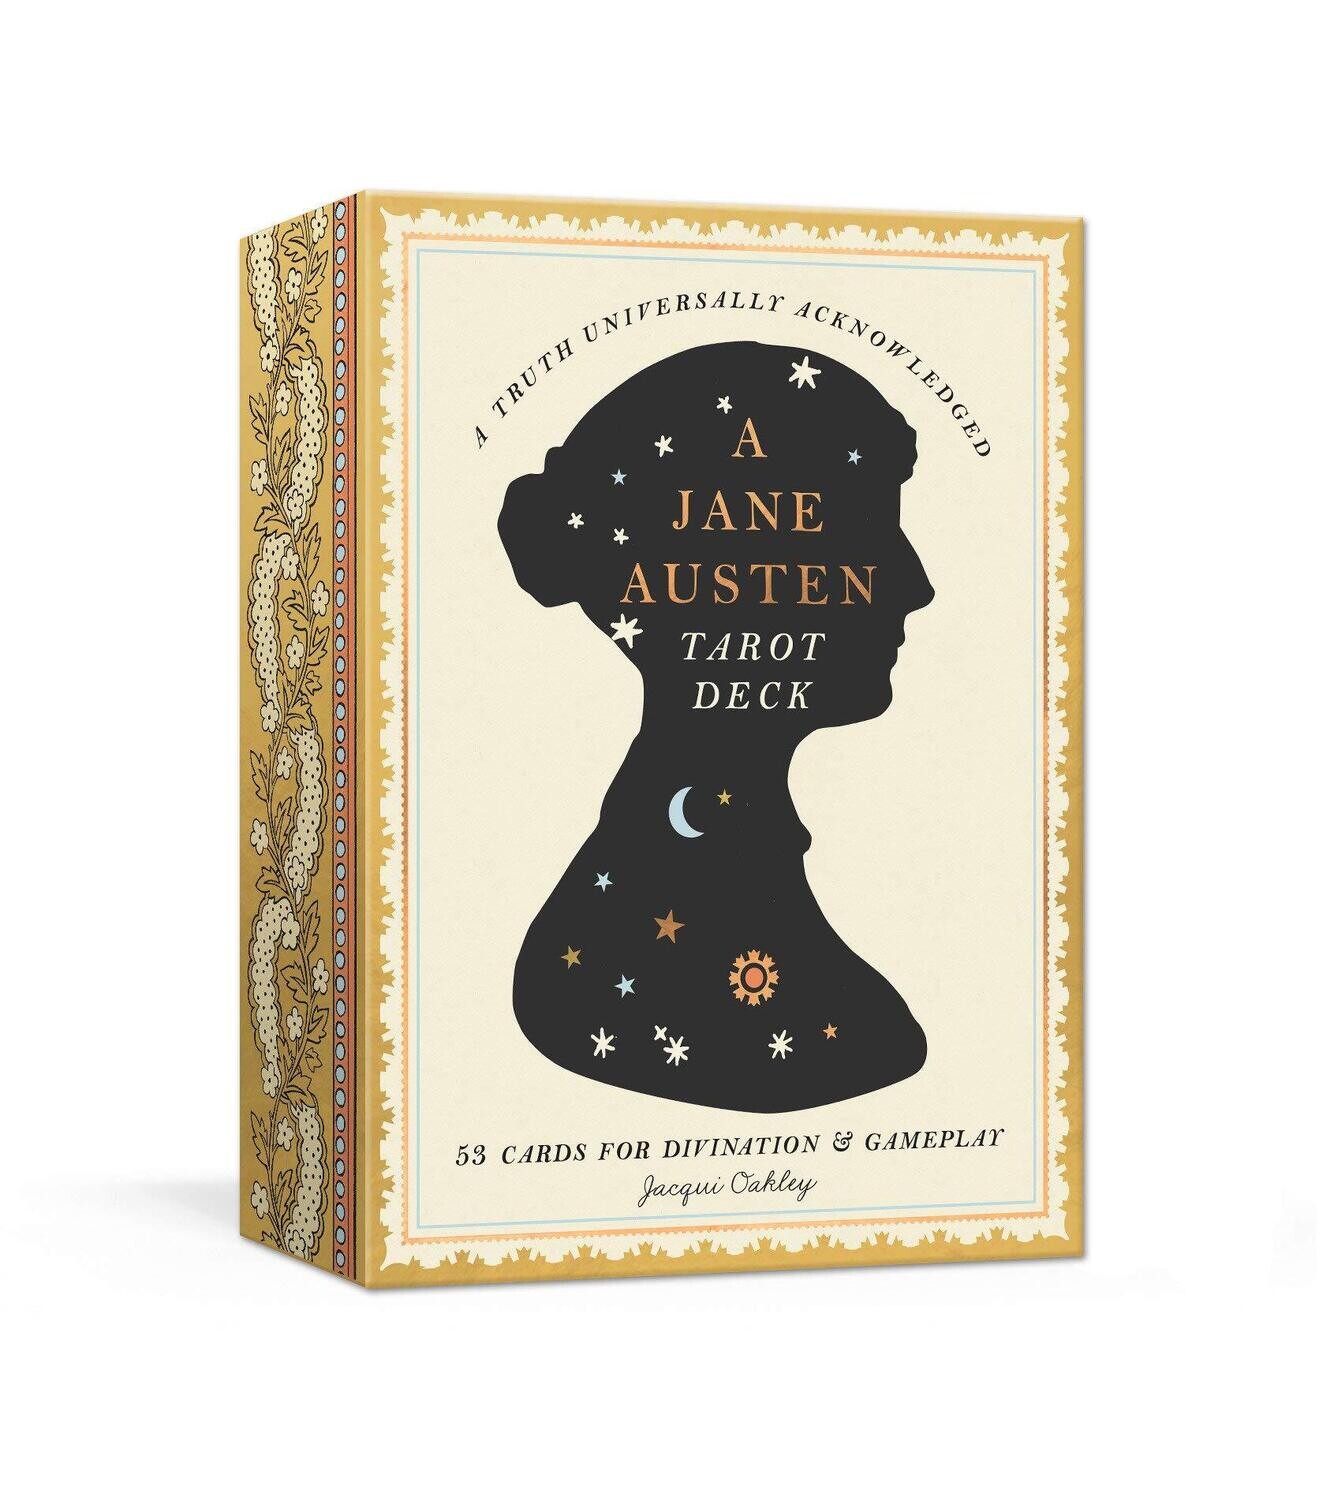 Jane Austen Tarot Deck: 53 Cards for Divination and Gameplay by Jacqui Oakley